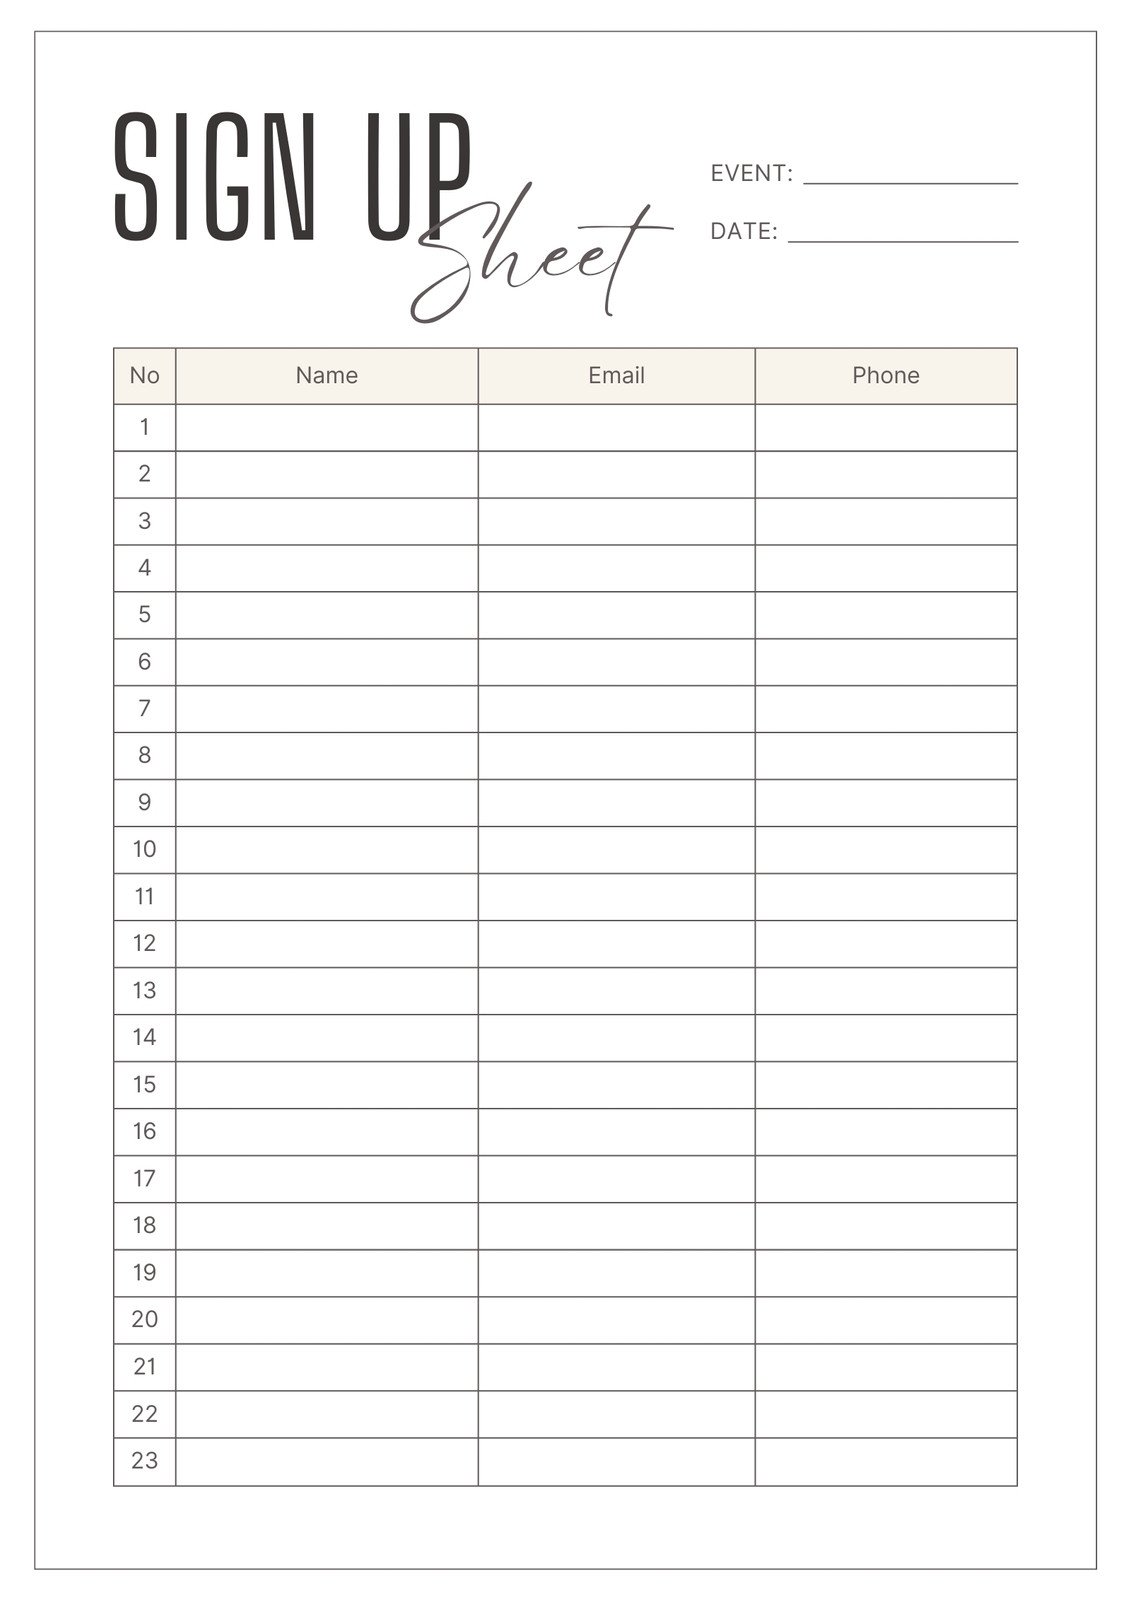 Pdfcoffee Com - Fill and Sign Printable Template Online